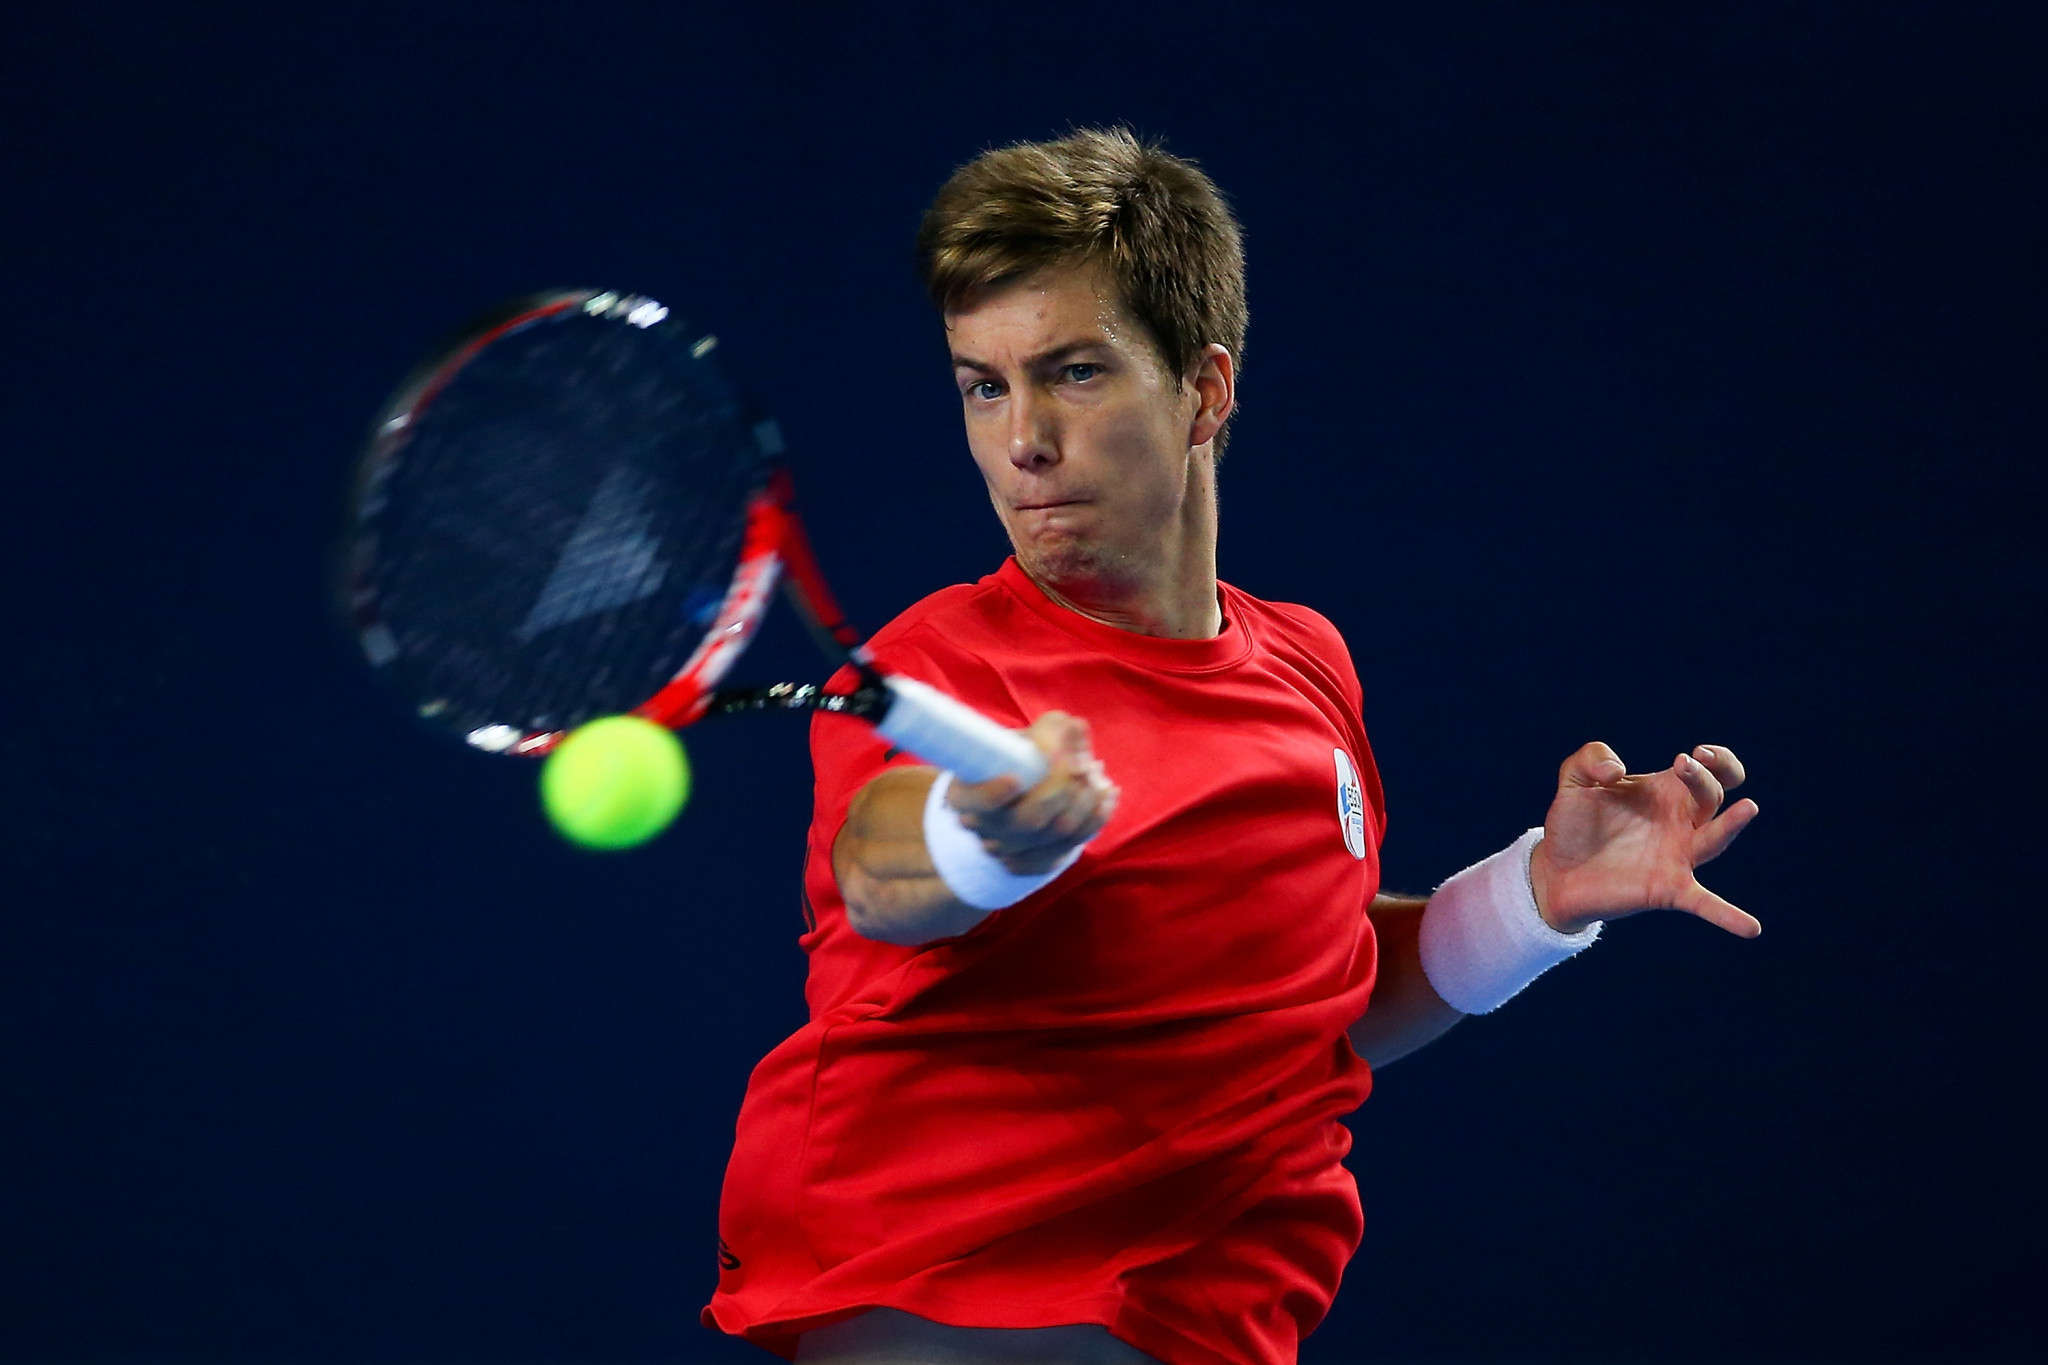 Aljaž Bedene attended practice sessions, such as this one in Birmingham, with the GB Davis Cup team but was unable to play in a competitive match ©Getty Images